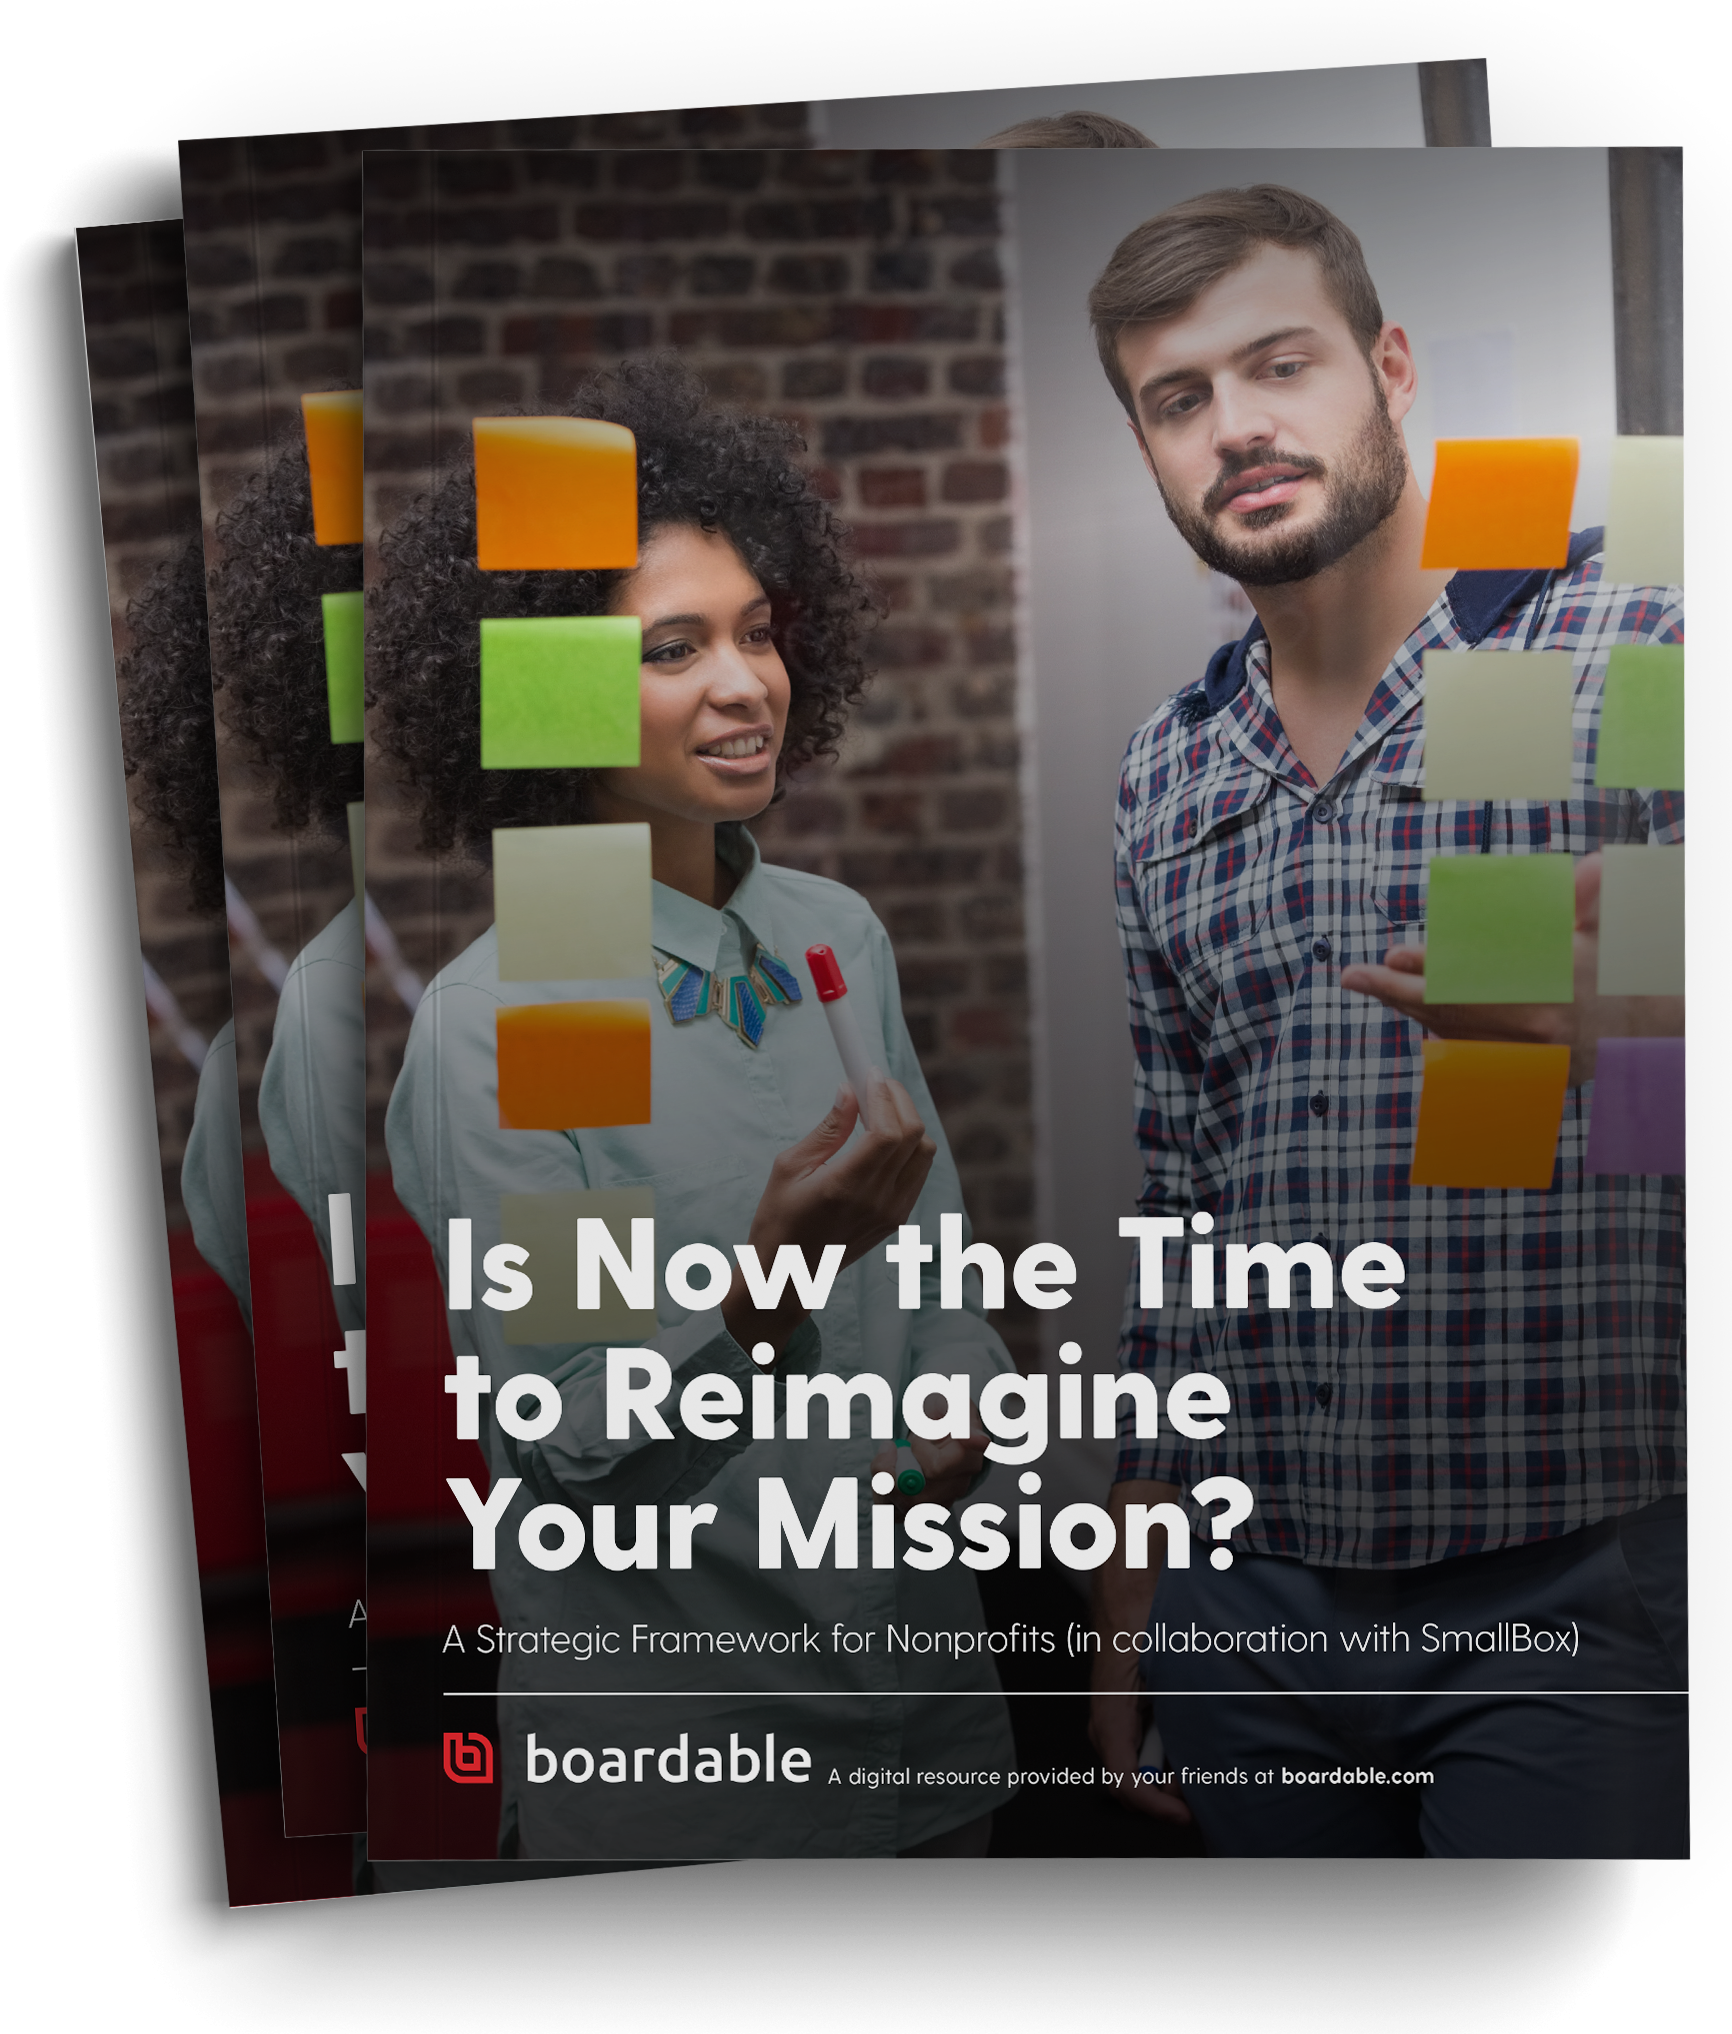 This free ebook from Boardable helps your nonprofit do strategic planning during uncertain times.